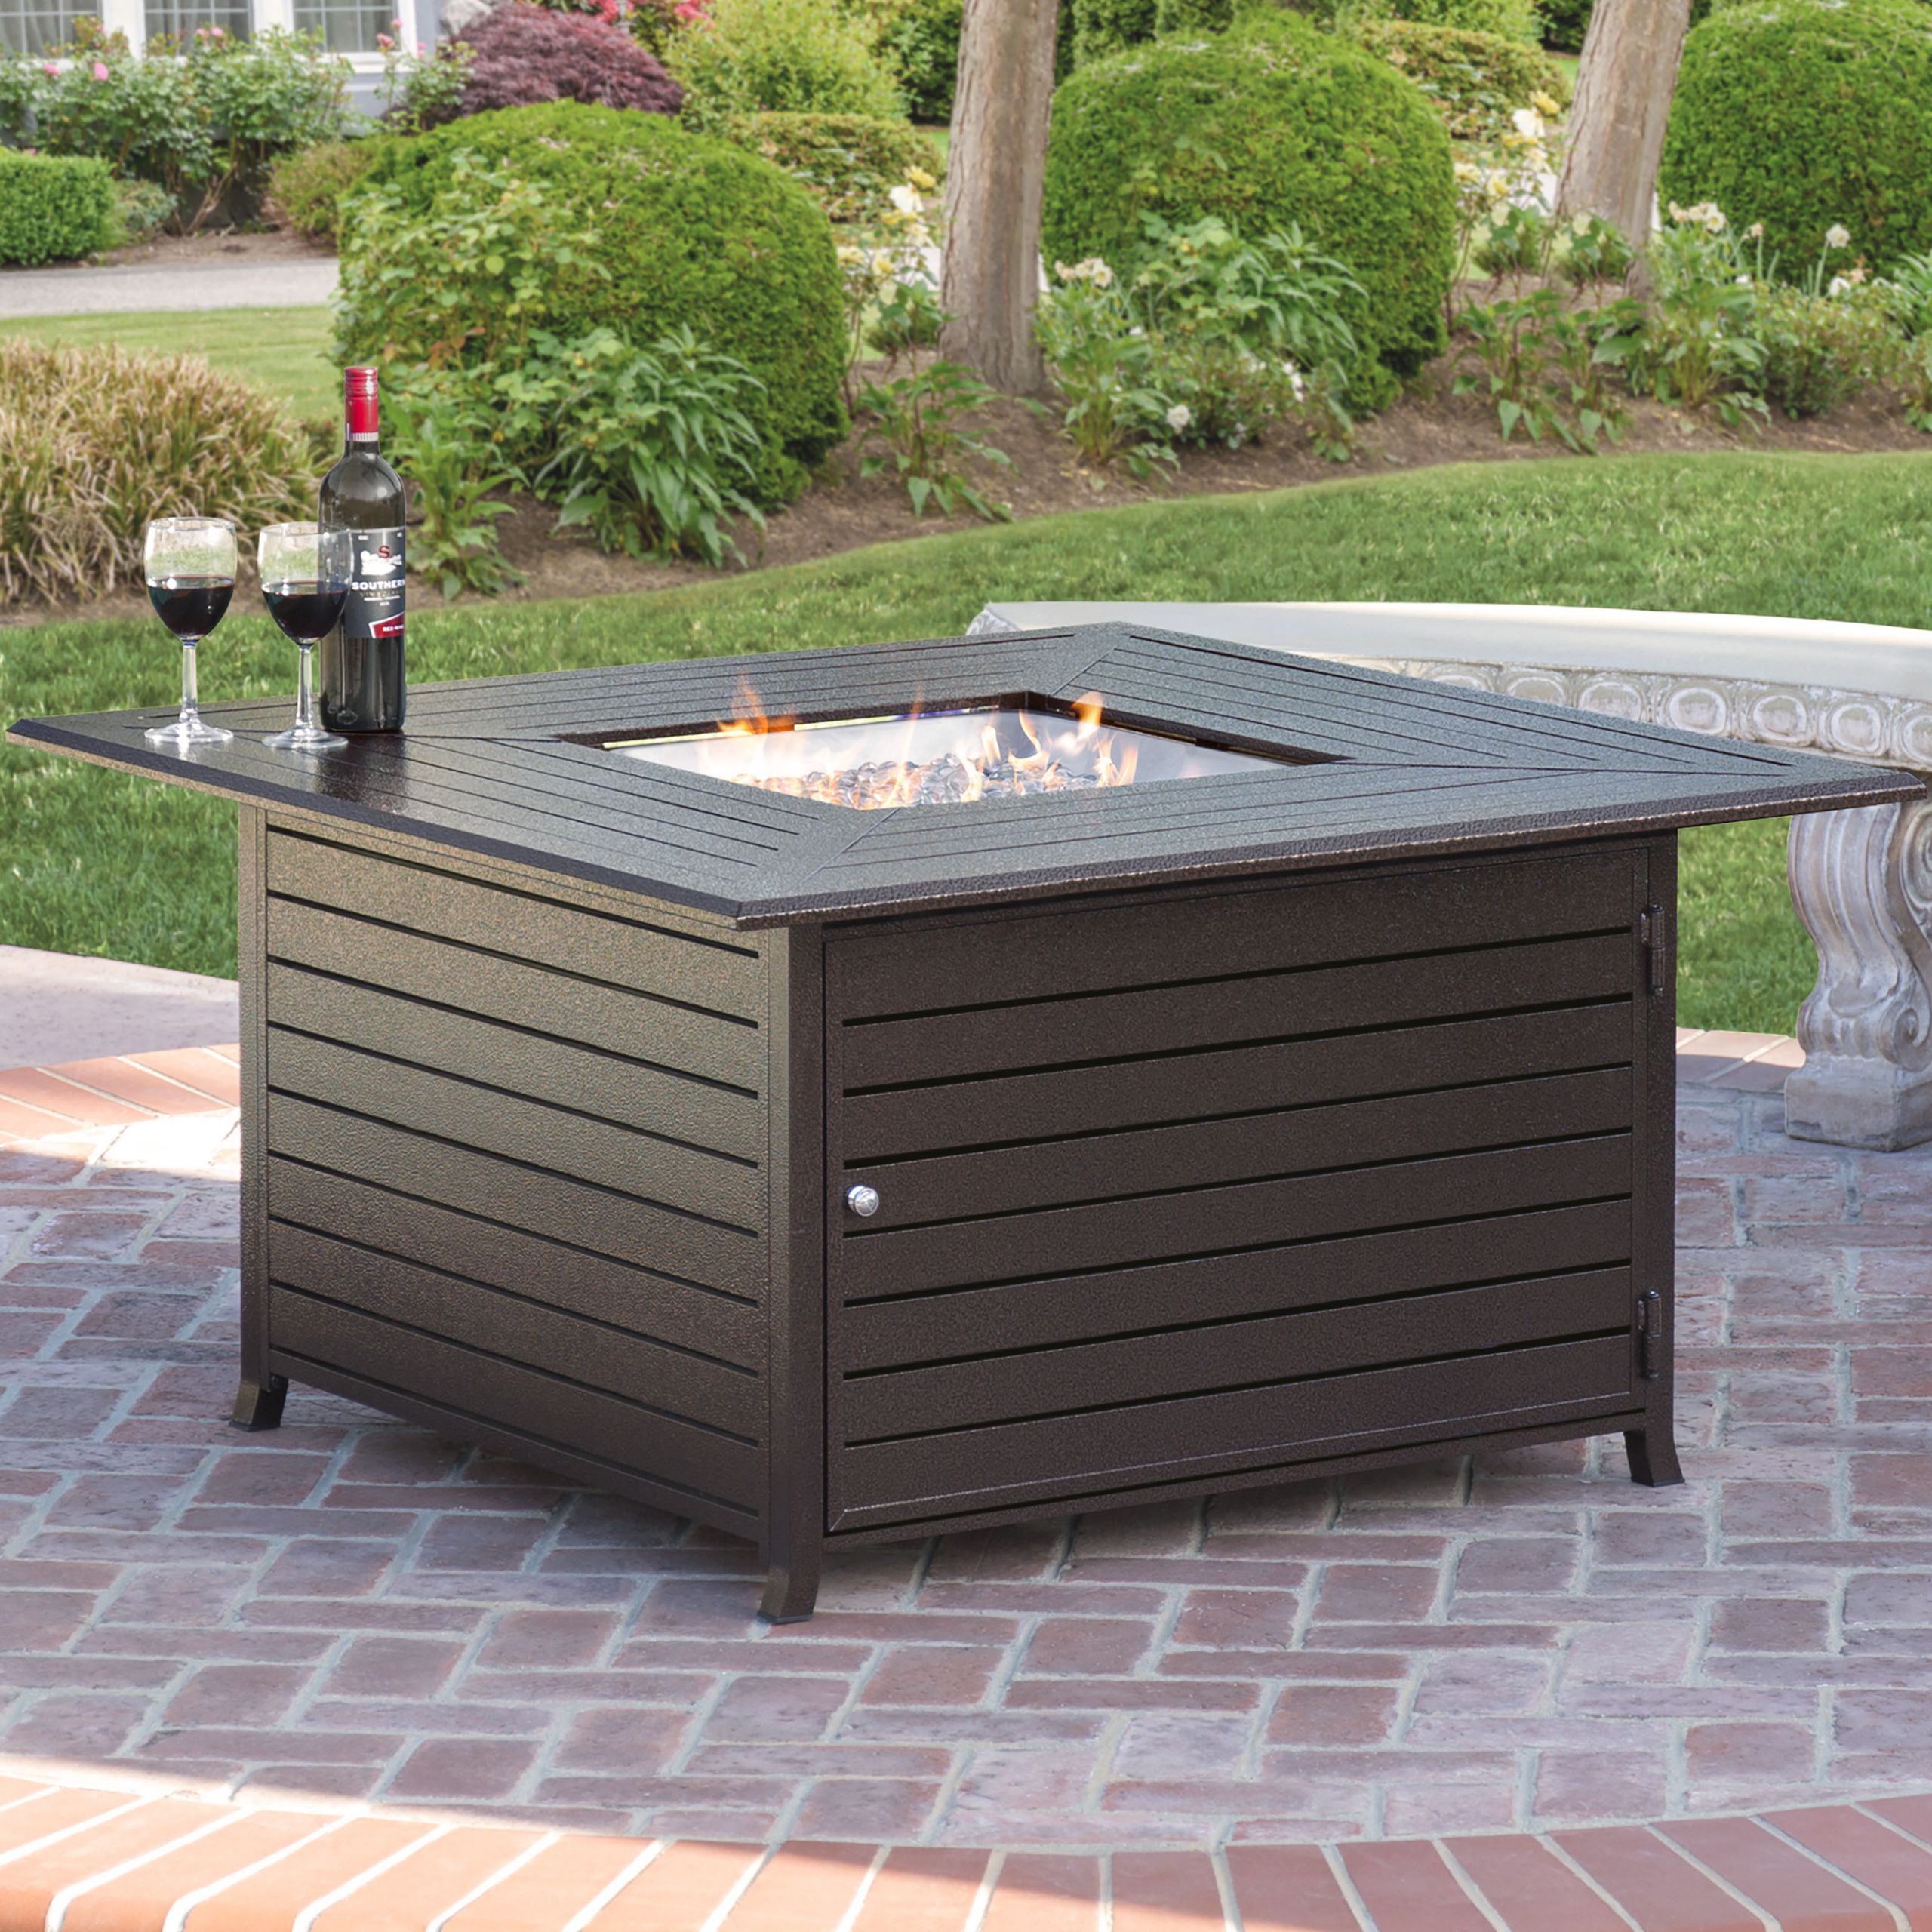 Outdoor Firepit Table
 Best Choice Products Extruded Aluminum Gas Outdoor Fire